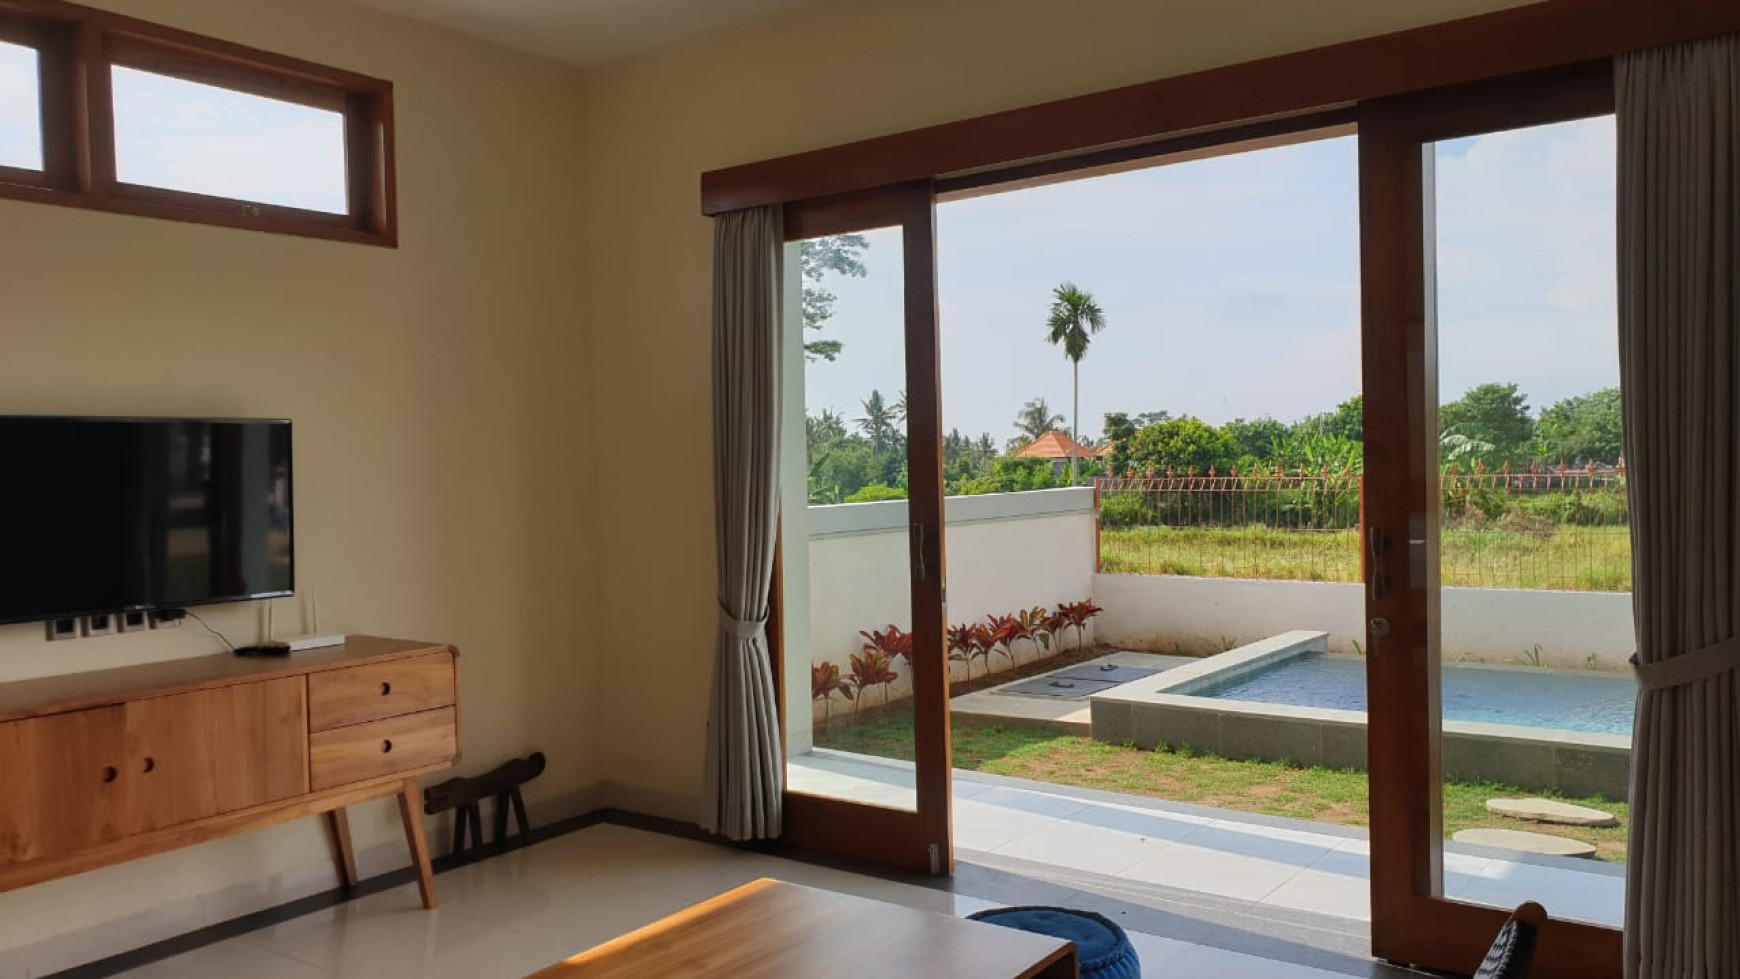 2 Bedroom Leasehold Villa with Amazing Rice Field View for Sale 15 Minutes from Ubud Center